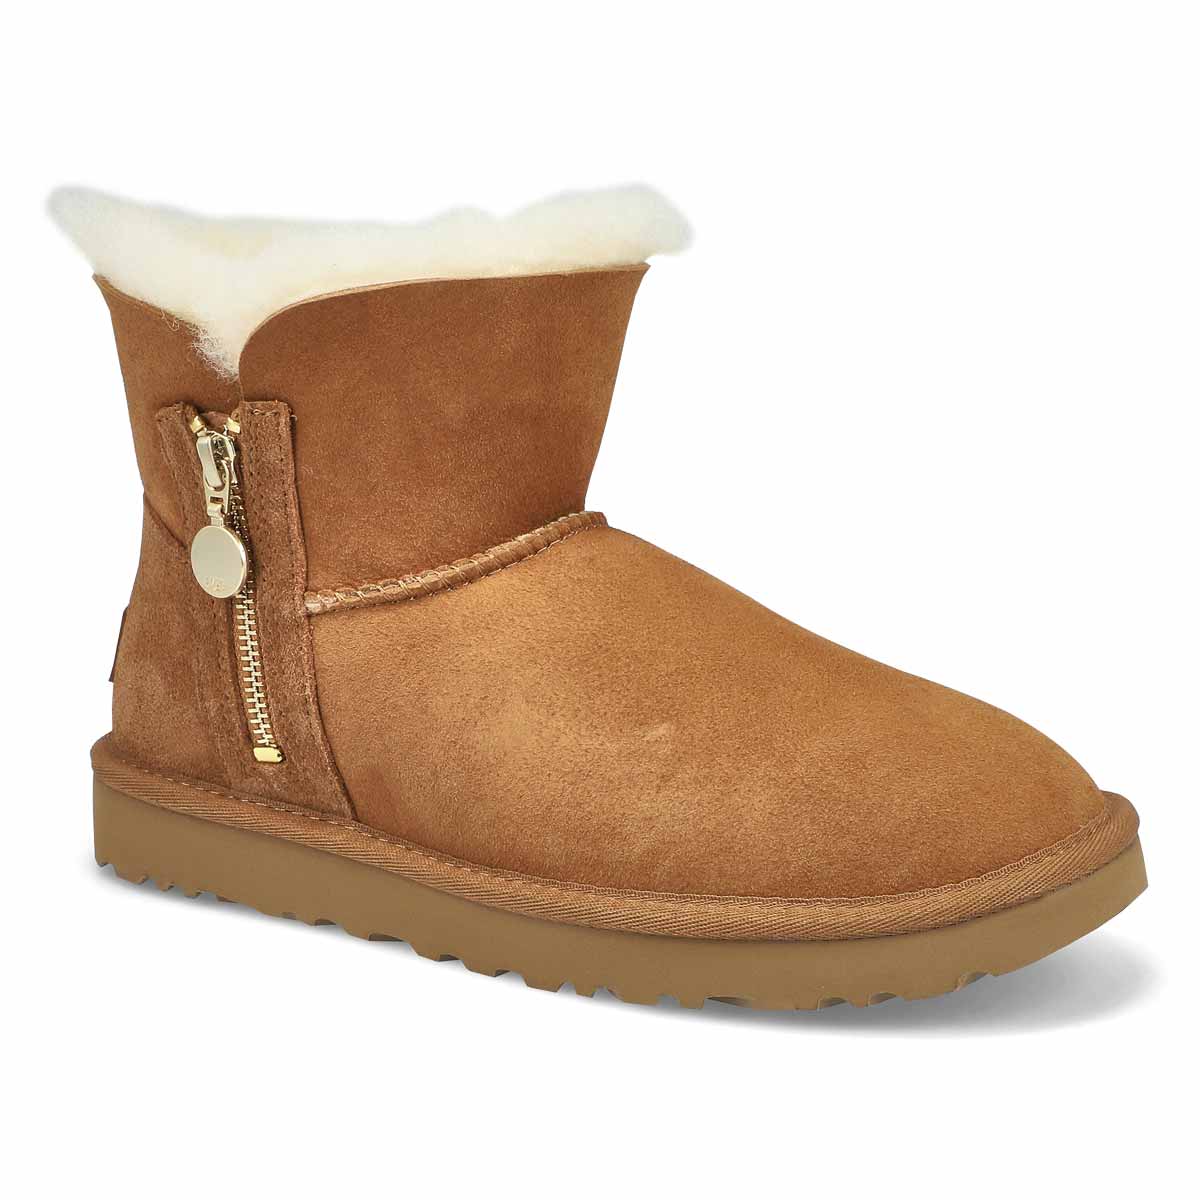 ugg boots slippers sale